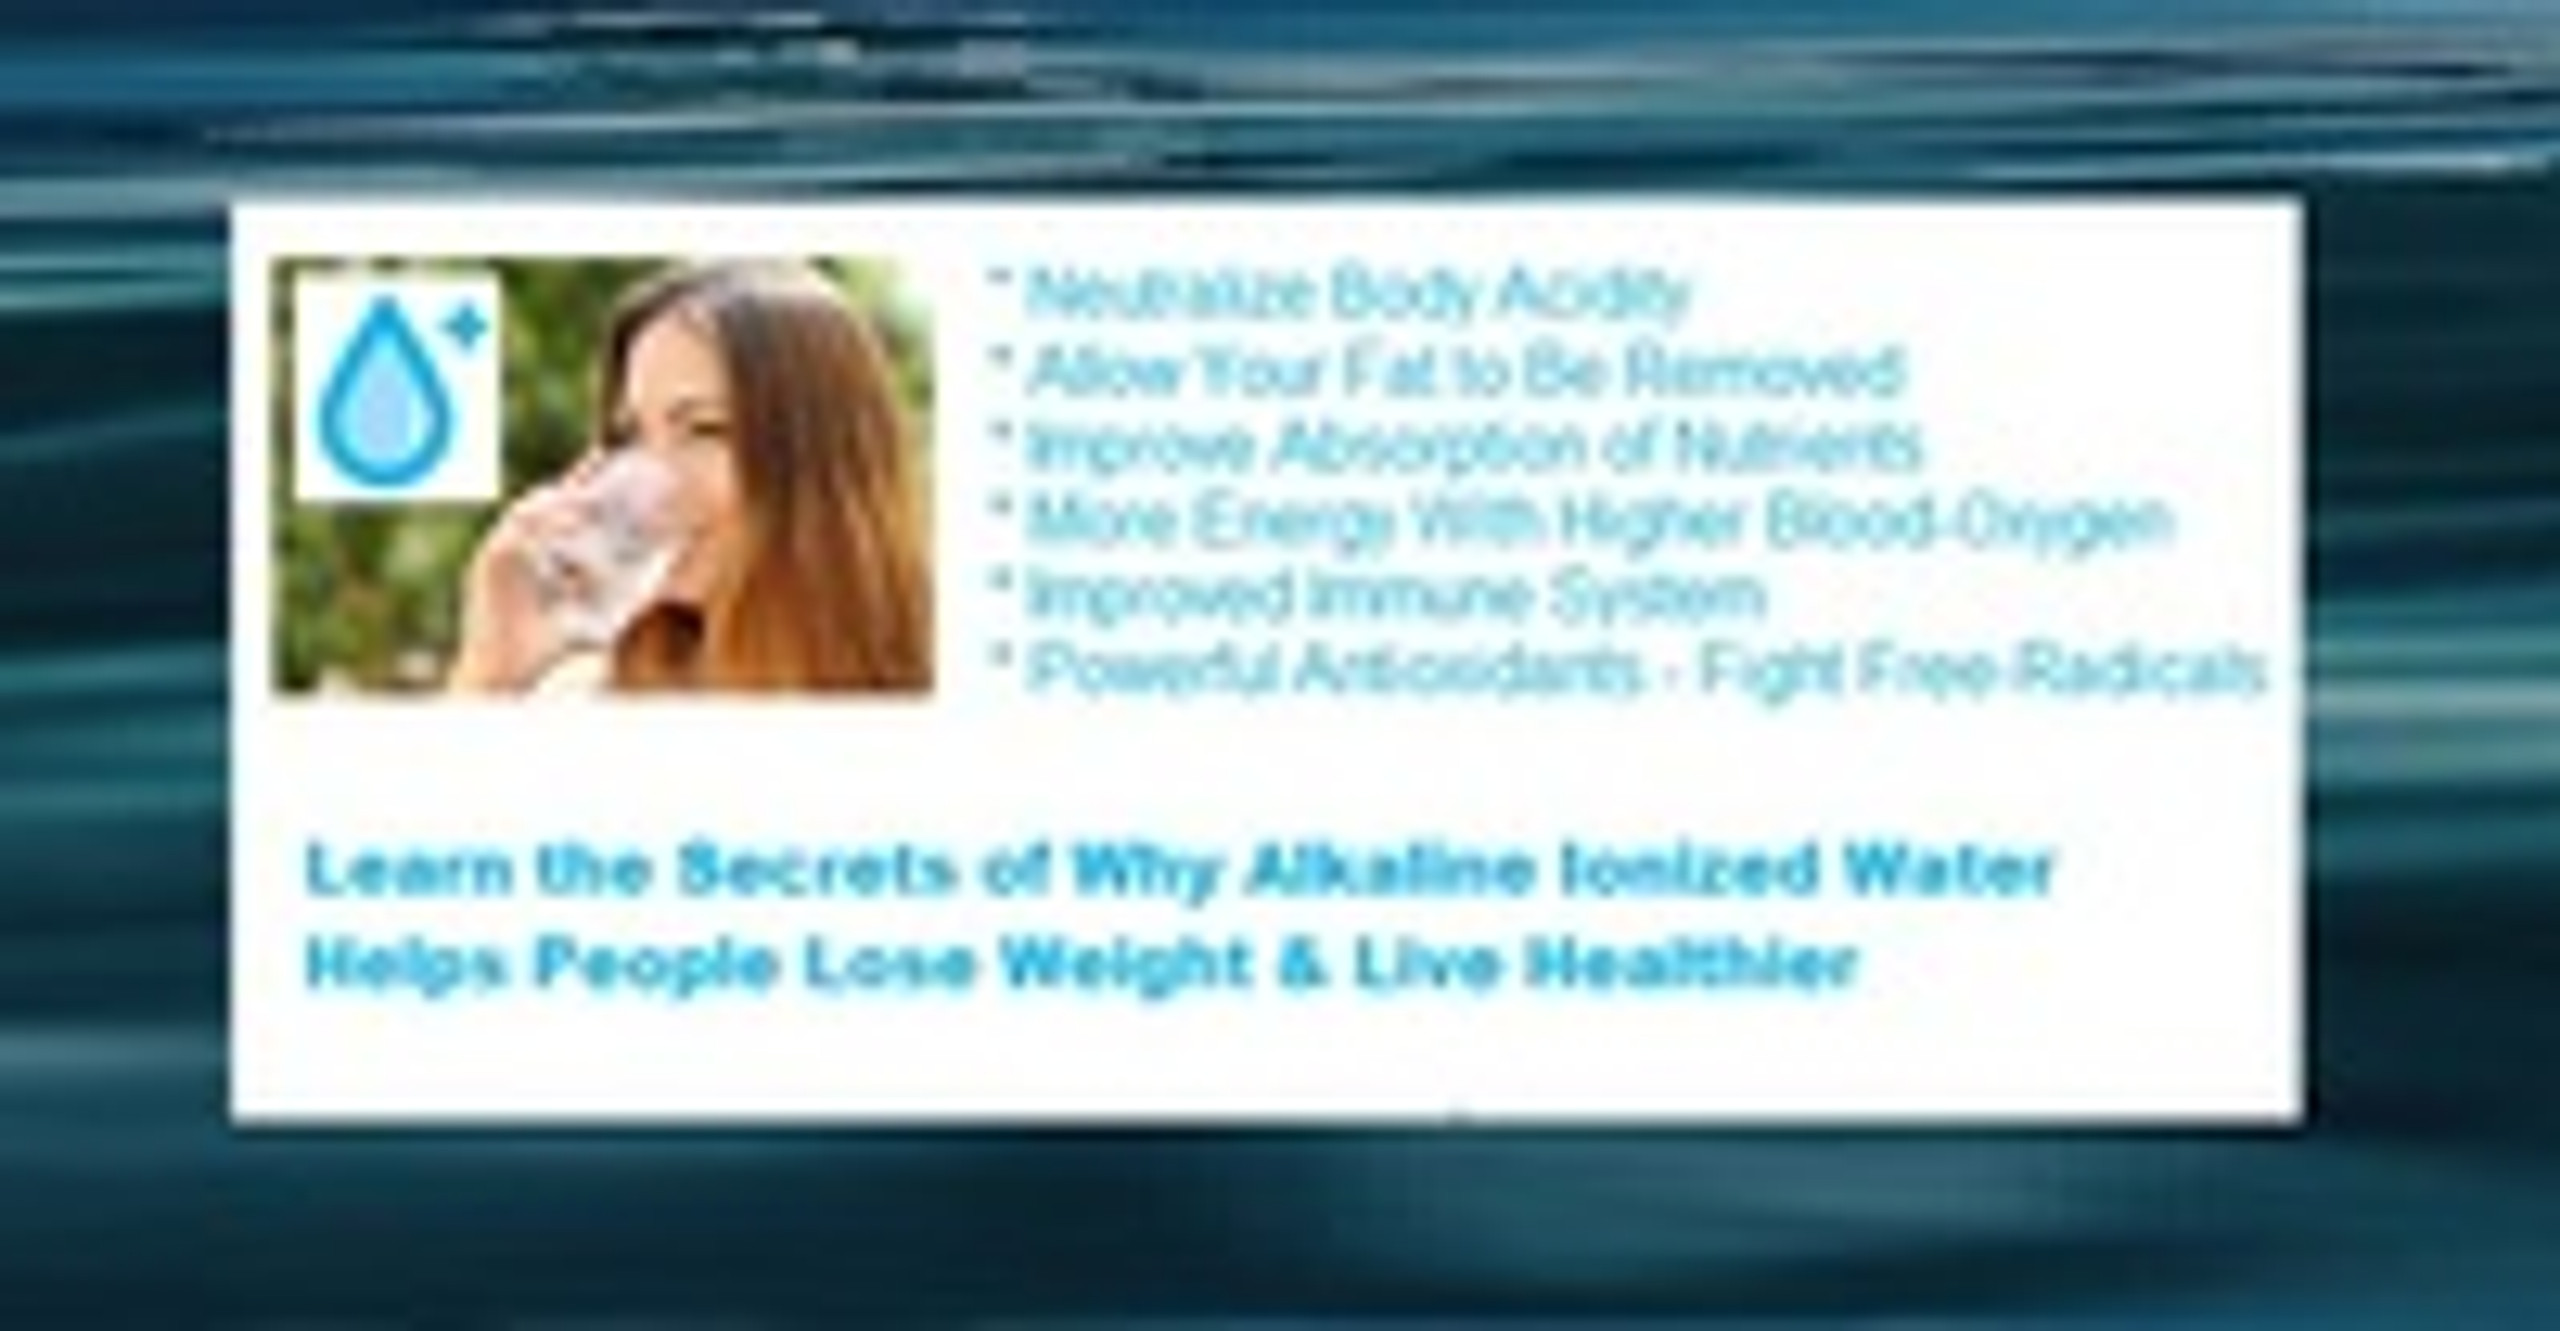 Learn 6 Secrets Of Why Alkaline Ionized Water Helps People Lose Weight And Live Healthier 8092